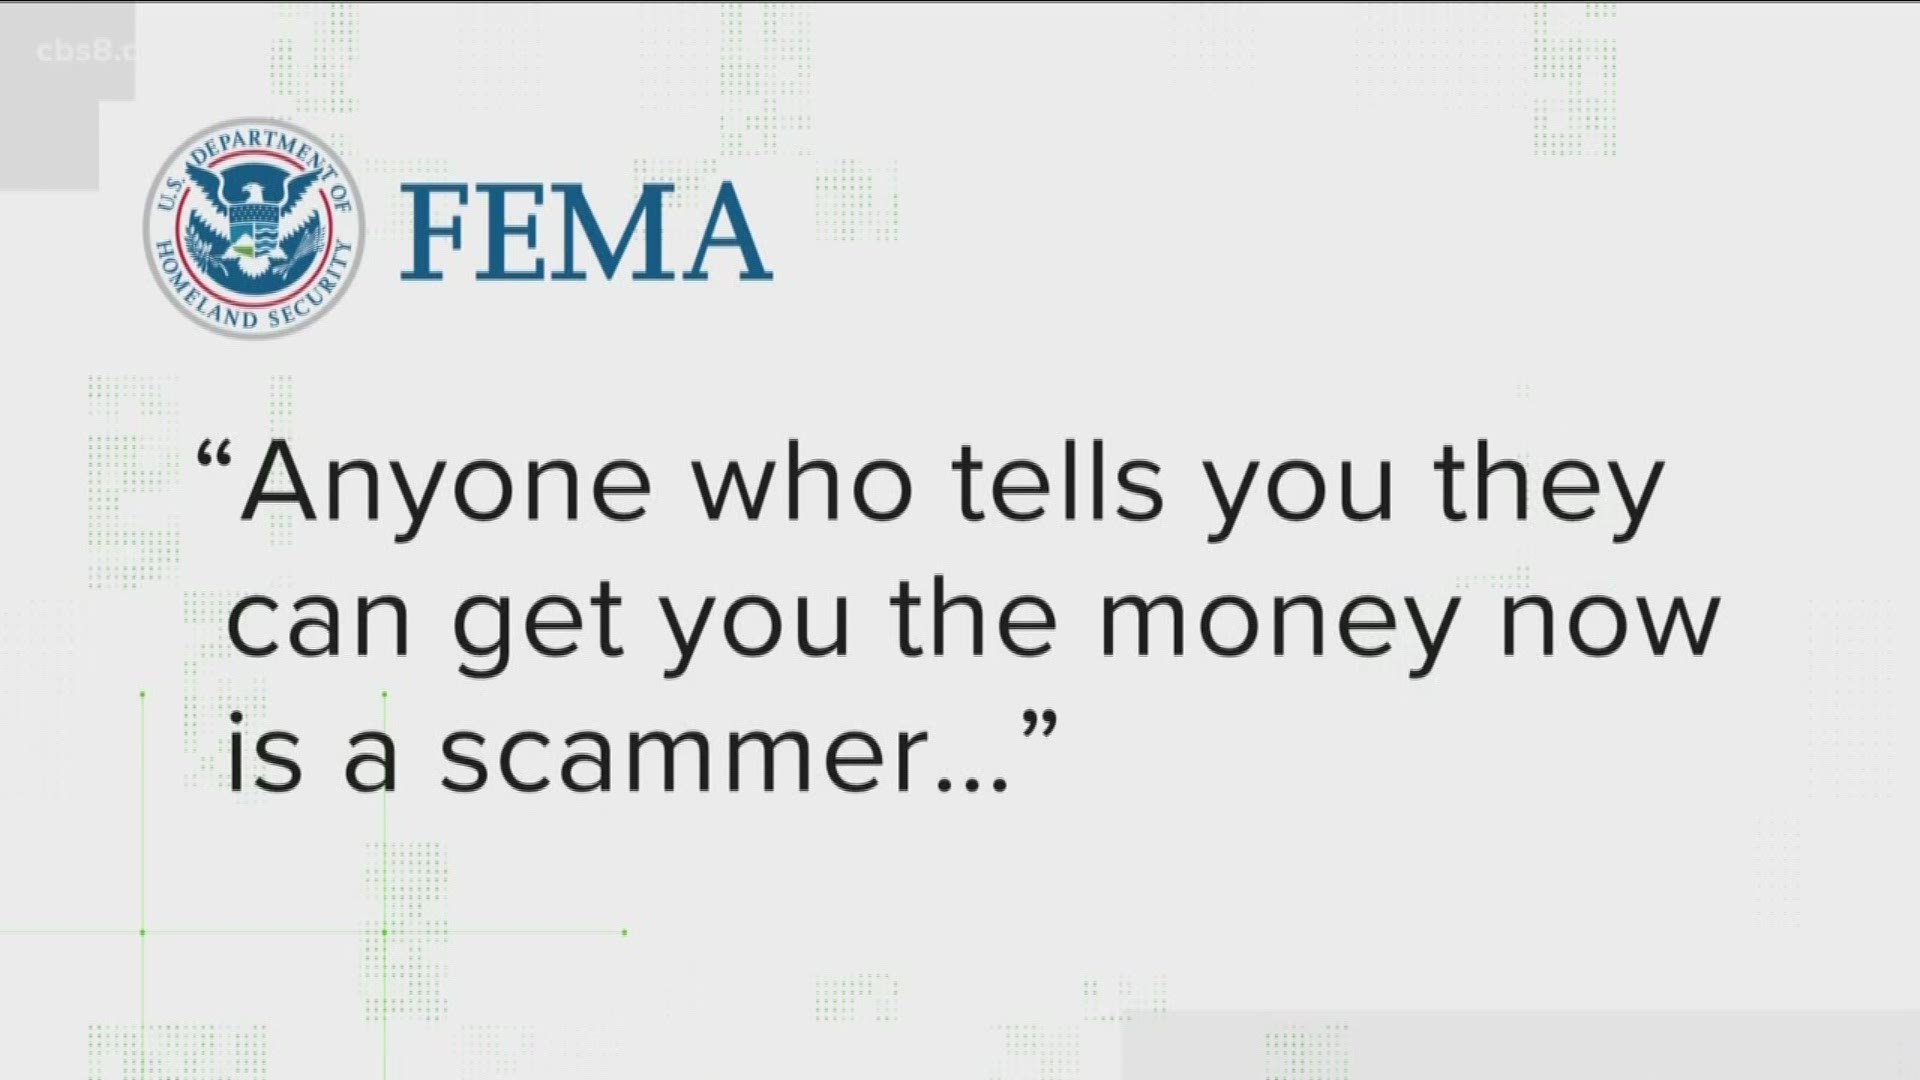 Anyone who tells you they can get you the money now is a scammer according to FEMA, the FTC. In reality, the money will take several weeks to arrive.